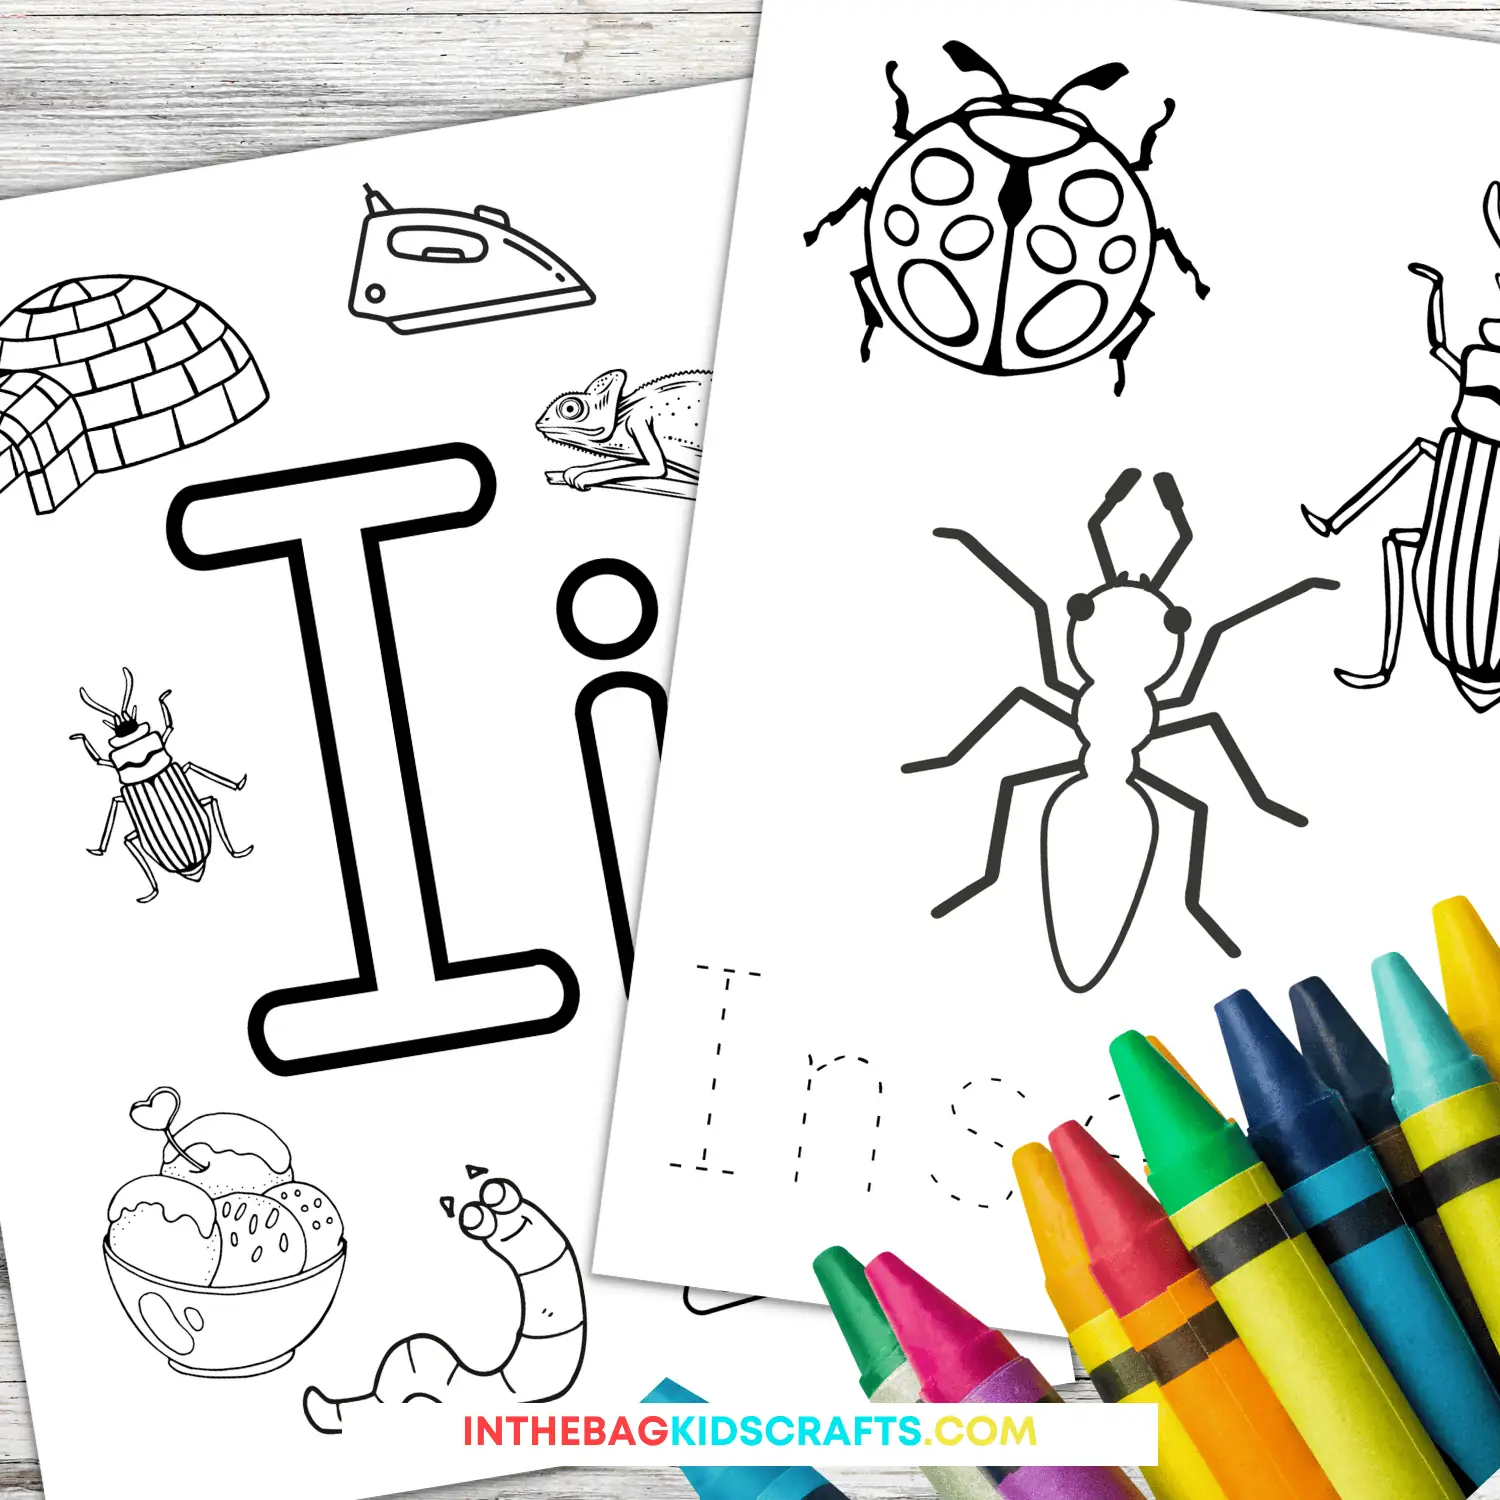 Letter i coloring pages free printable â in the bag kids crafts